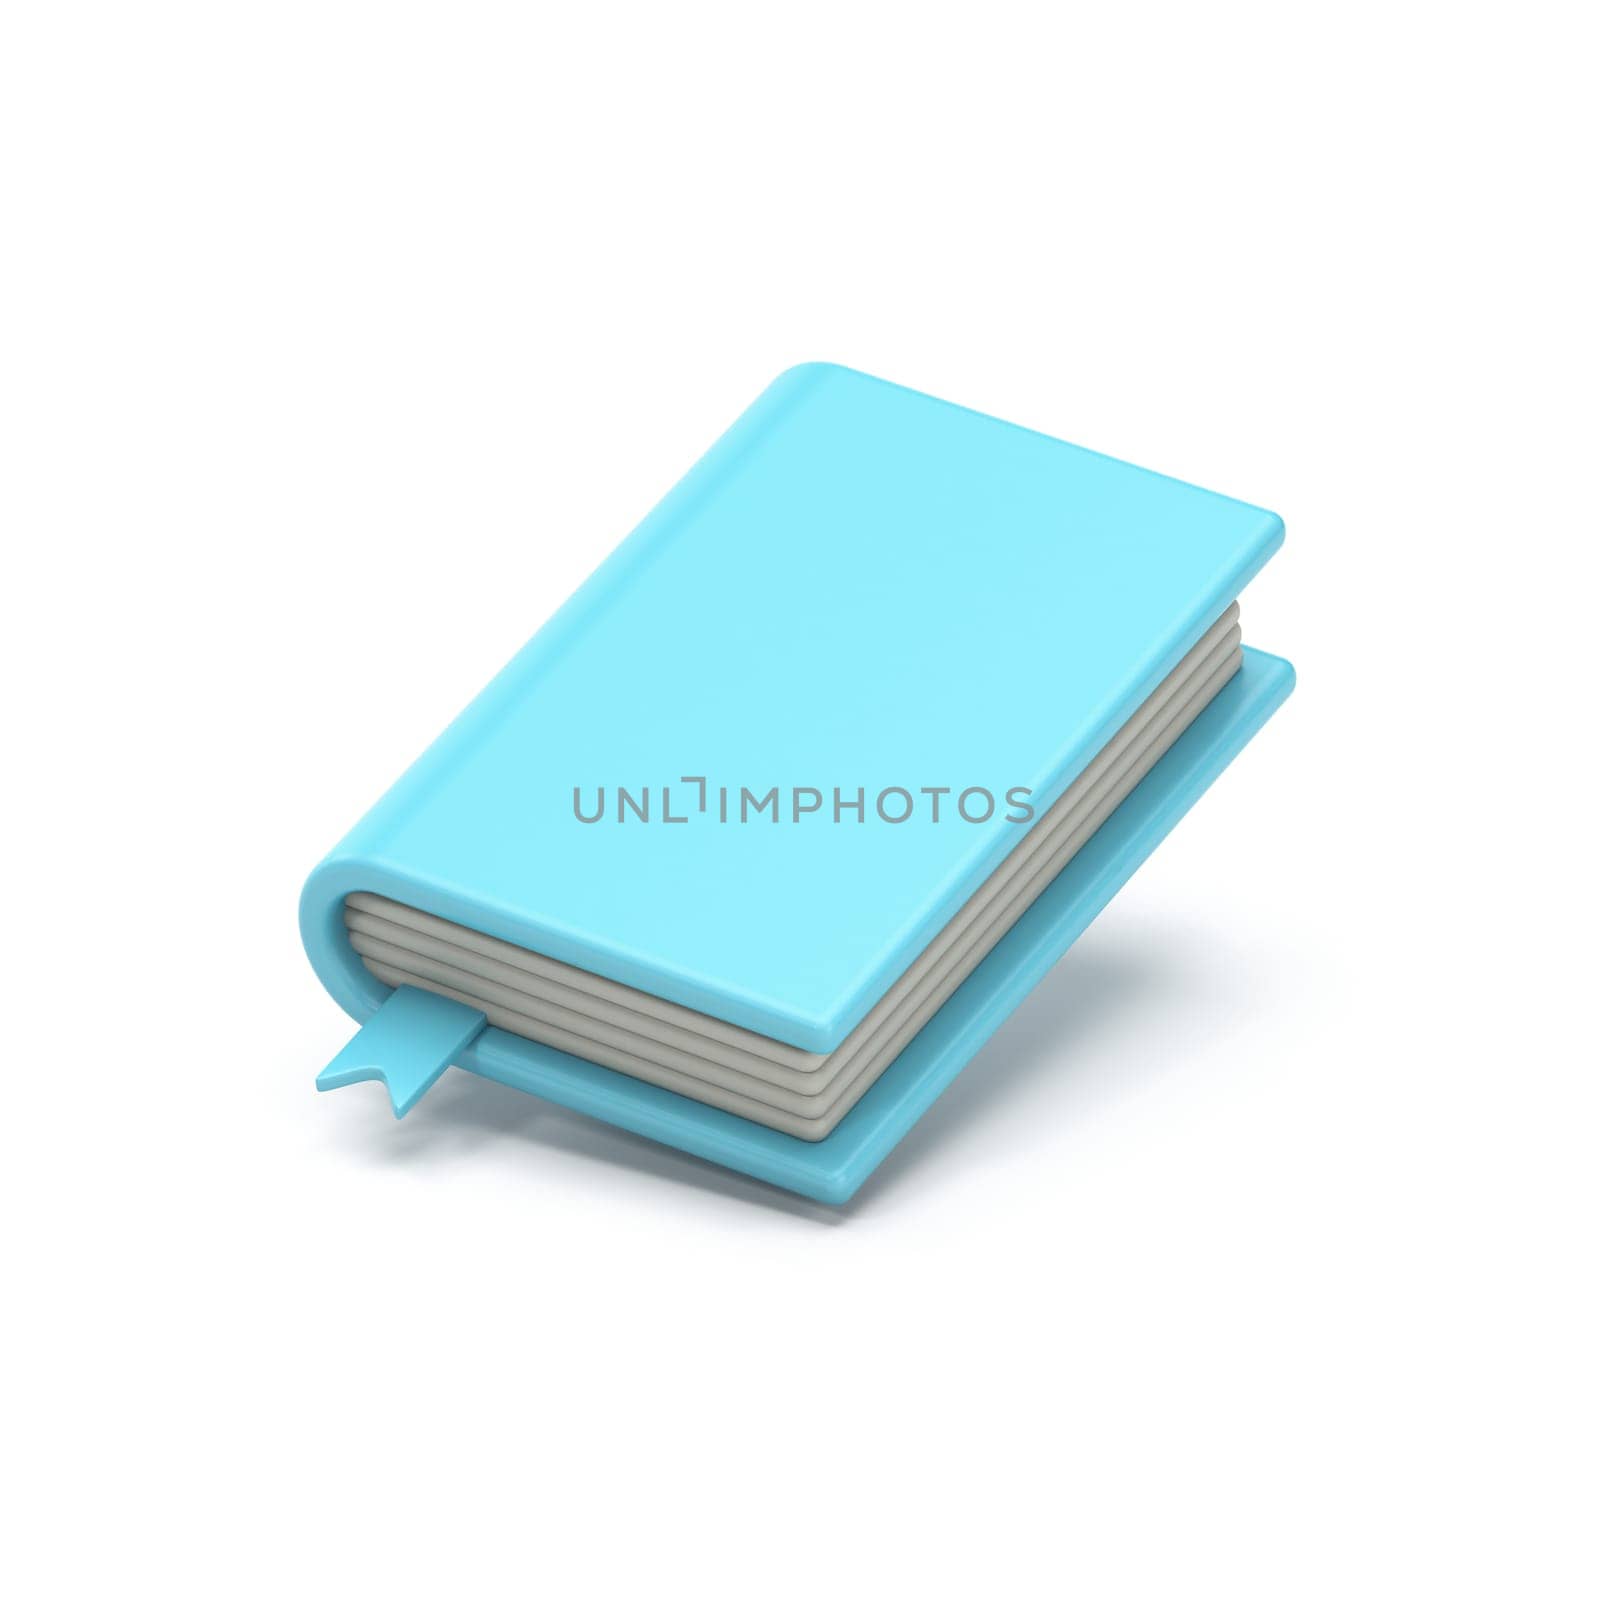 Blue closed book icon 3D rendering illustration isolated on white background